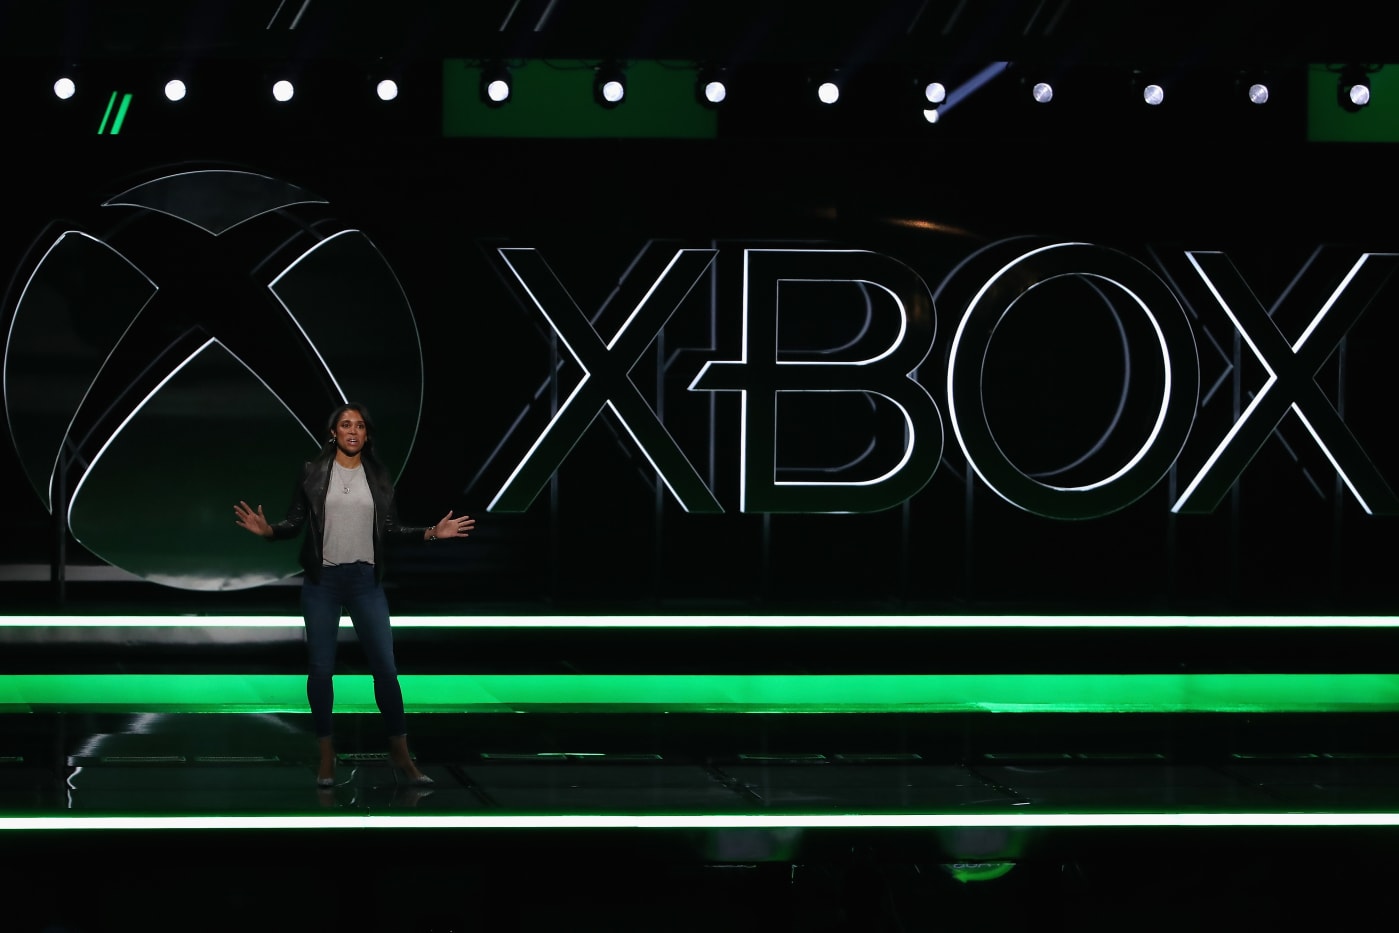 Xbox president thinks Apple's EU App Store plan is 'a step in the wrong direction'